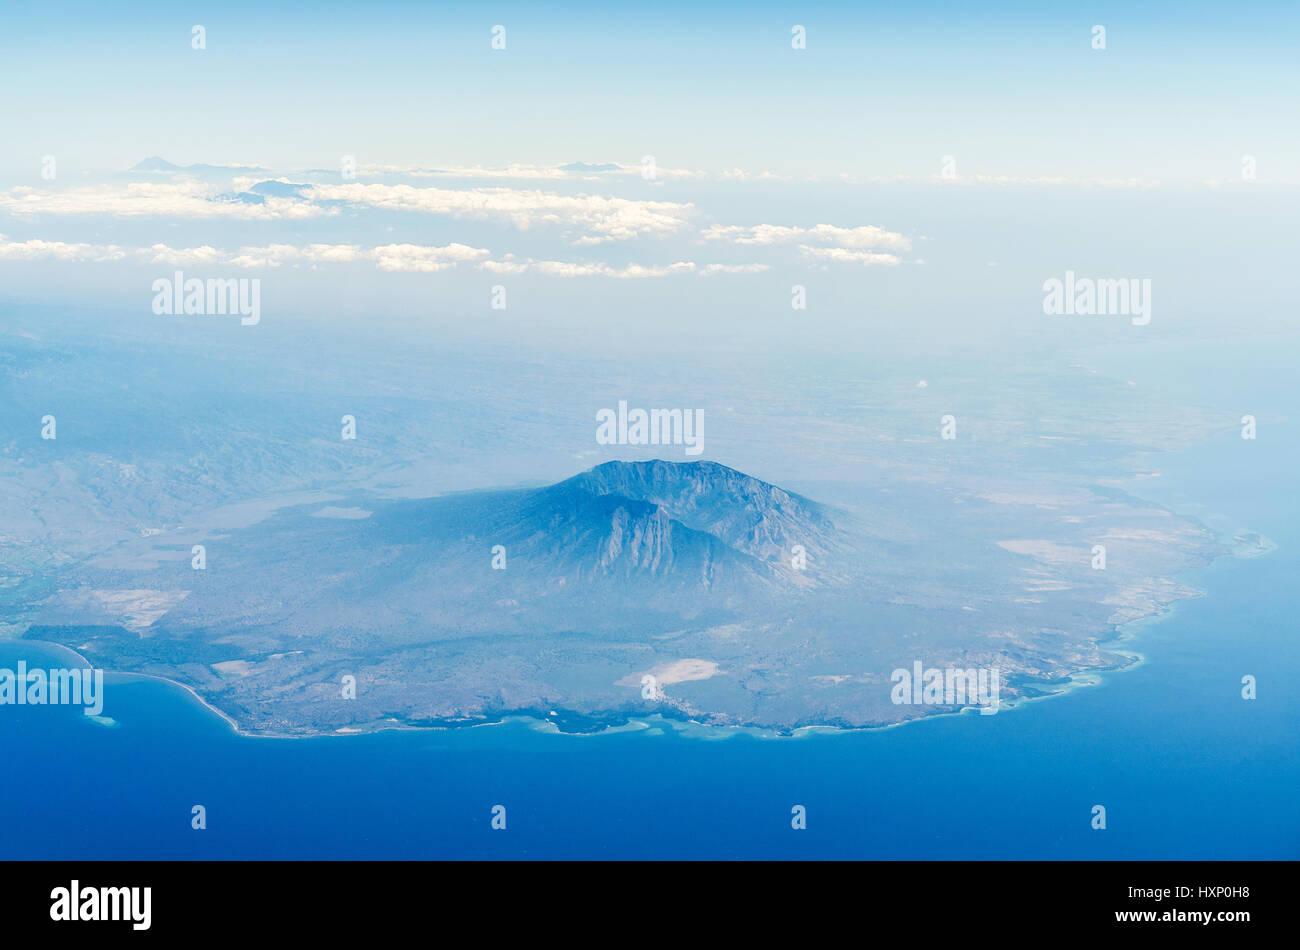 Aerial view of baluran national park in java indonesia Stock Photo